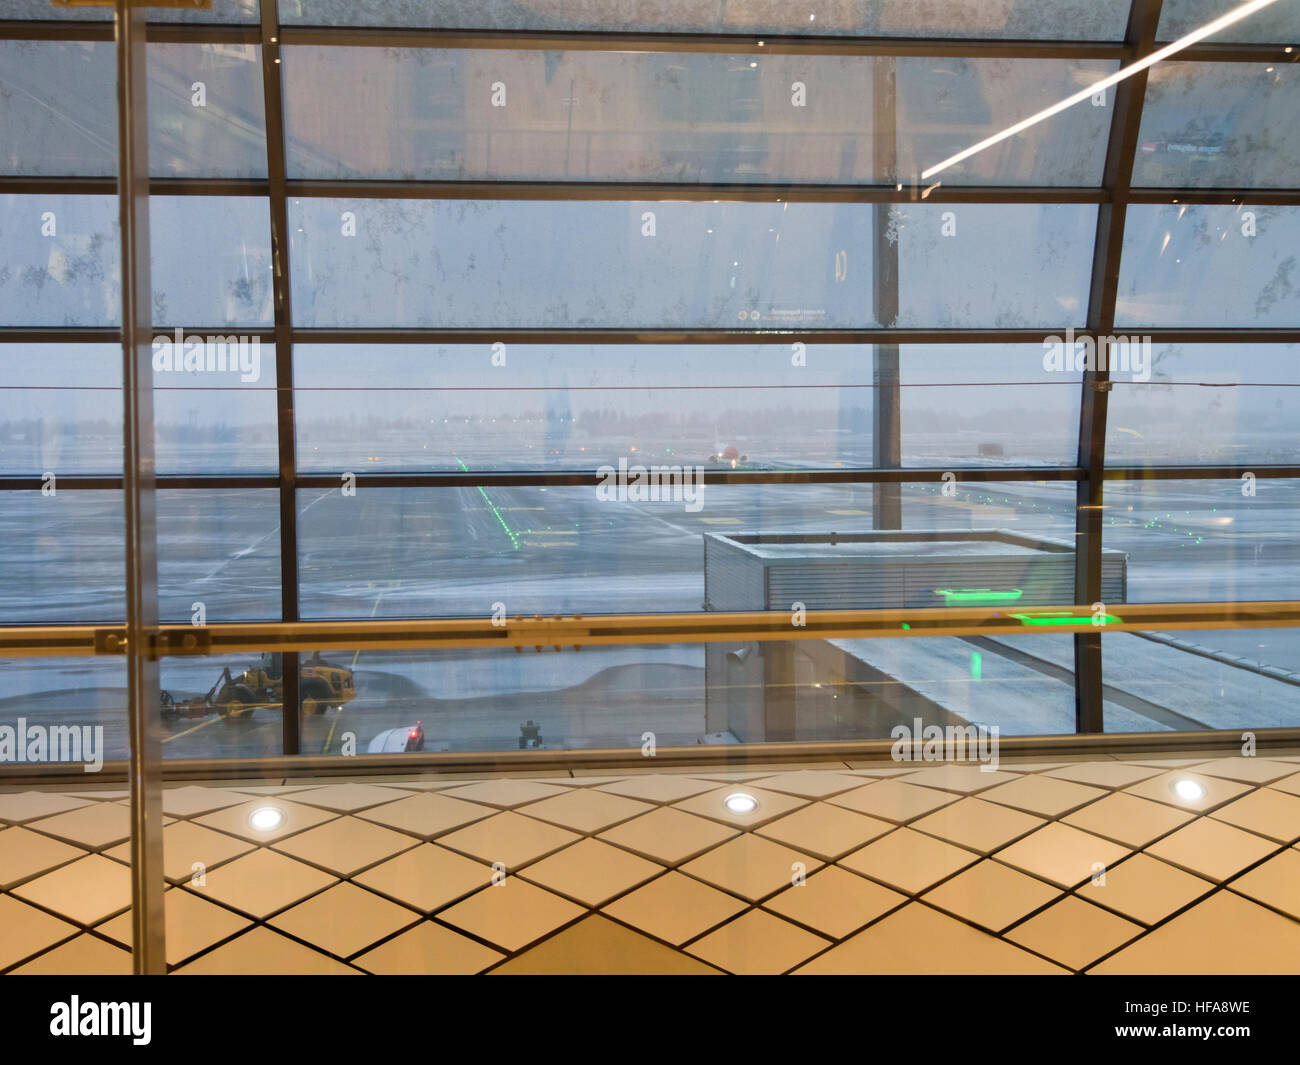 New airport terminal in Oslo Norway 2016, looking out at dreary weather for flying, dark, snow, sleet, normal winter conditions Stock Photo